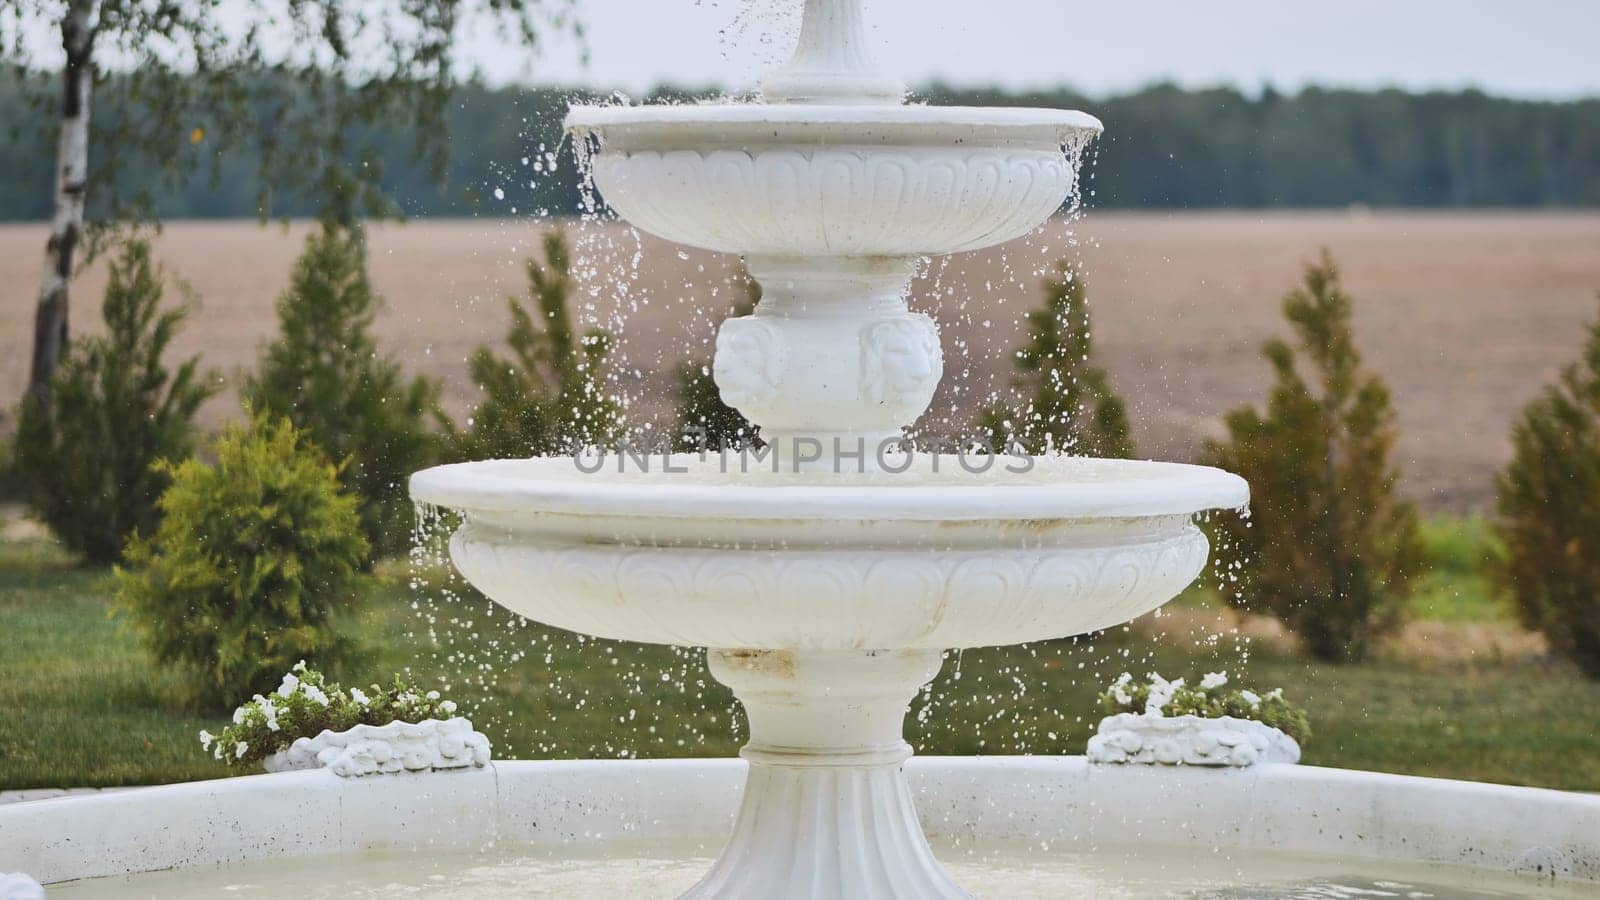 Vintage courtyard fountain isolated on white with clipping path